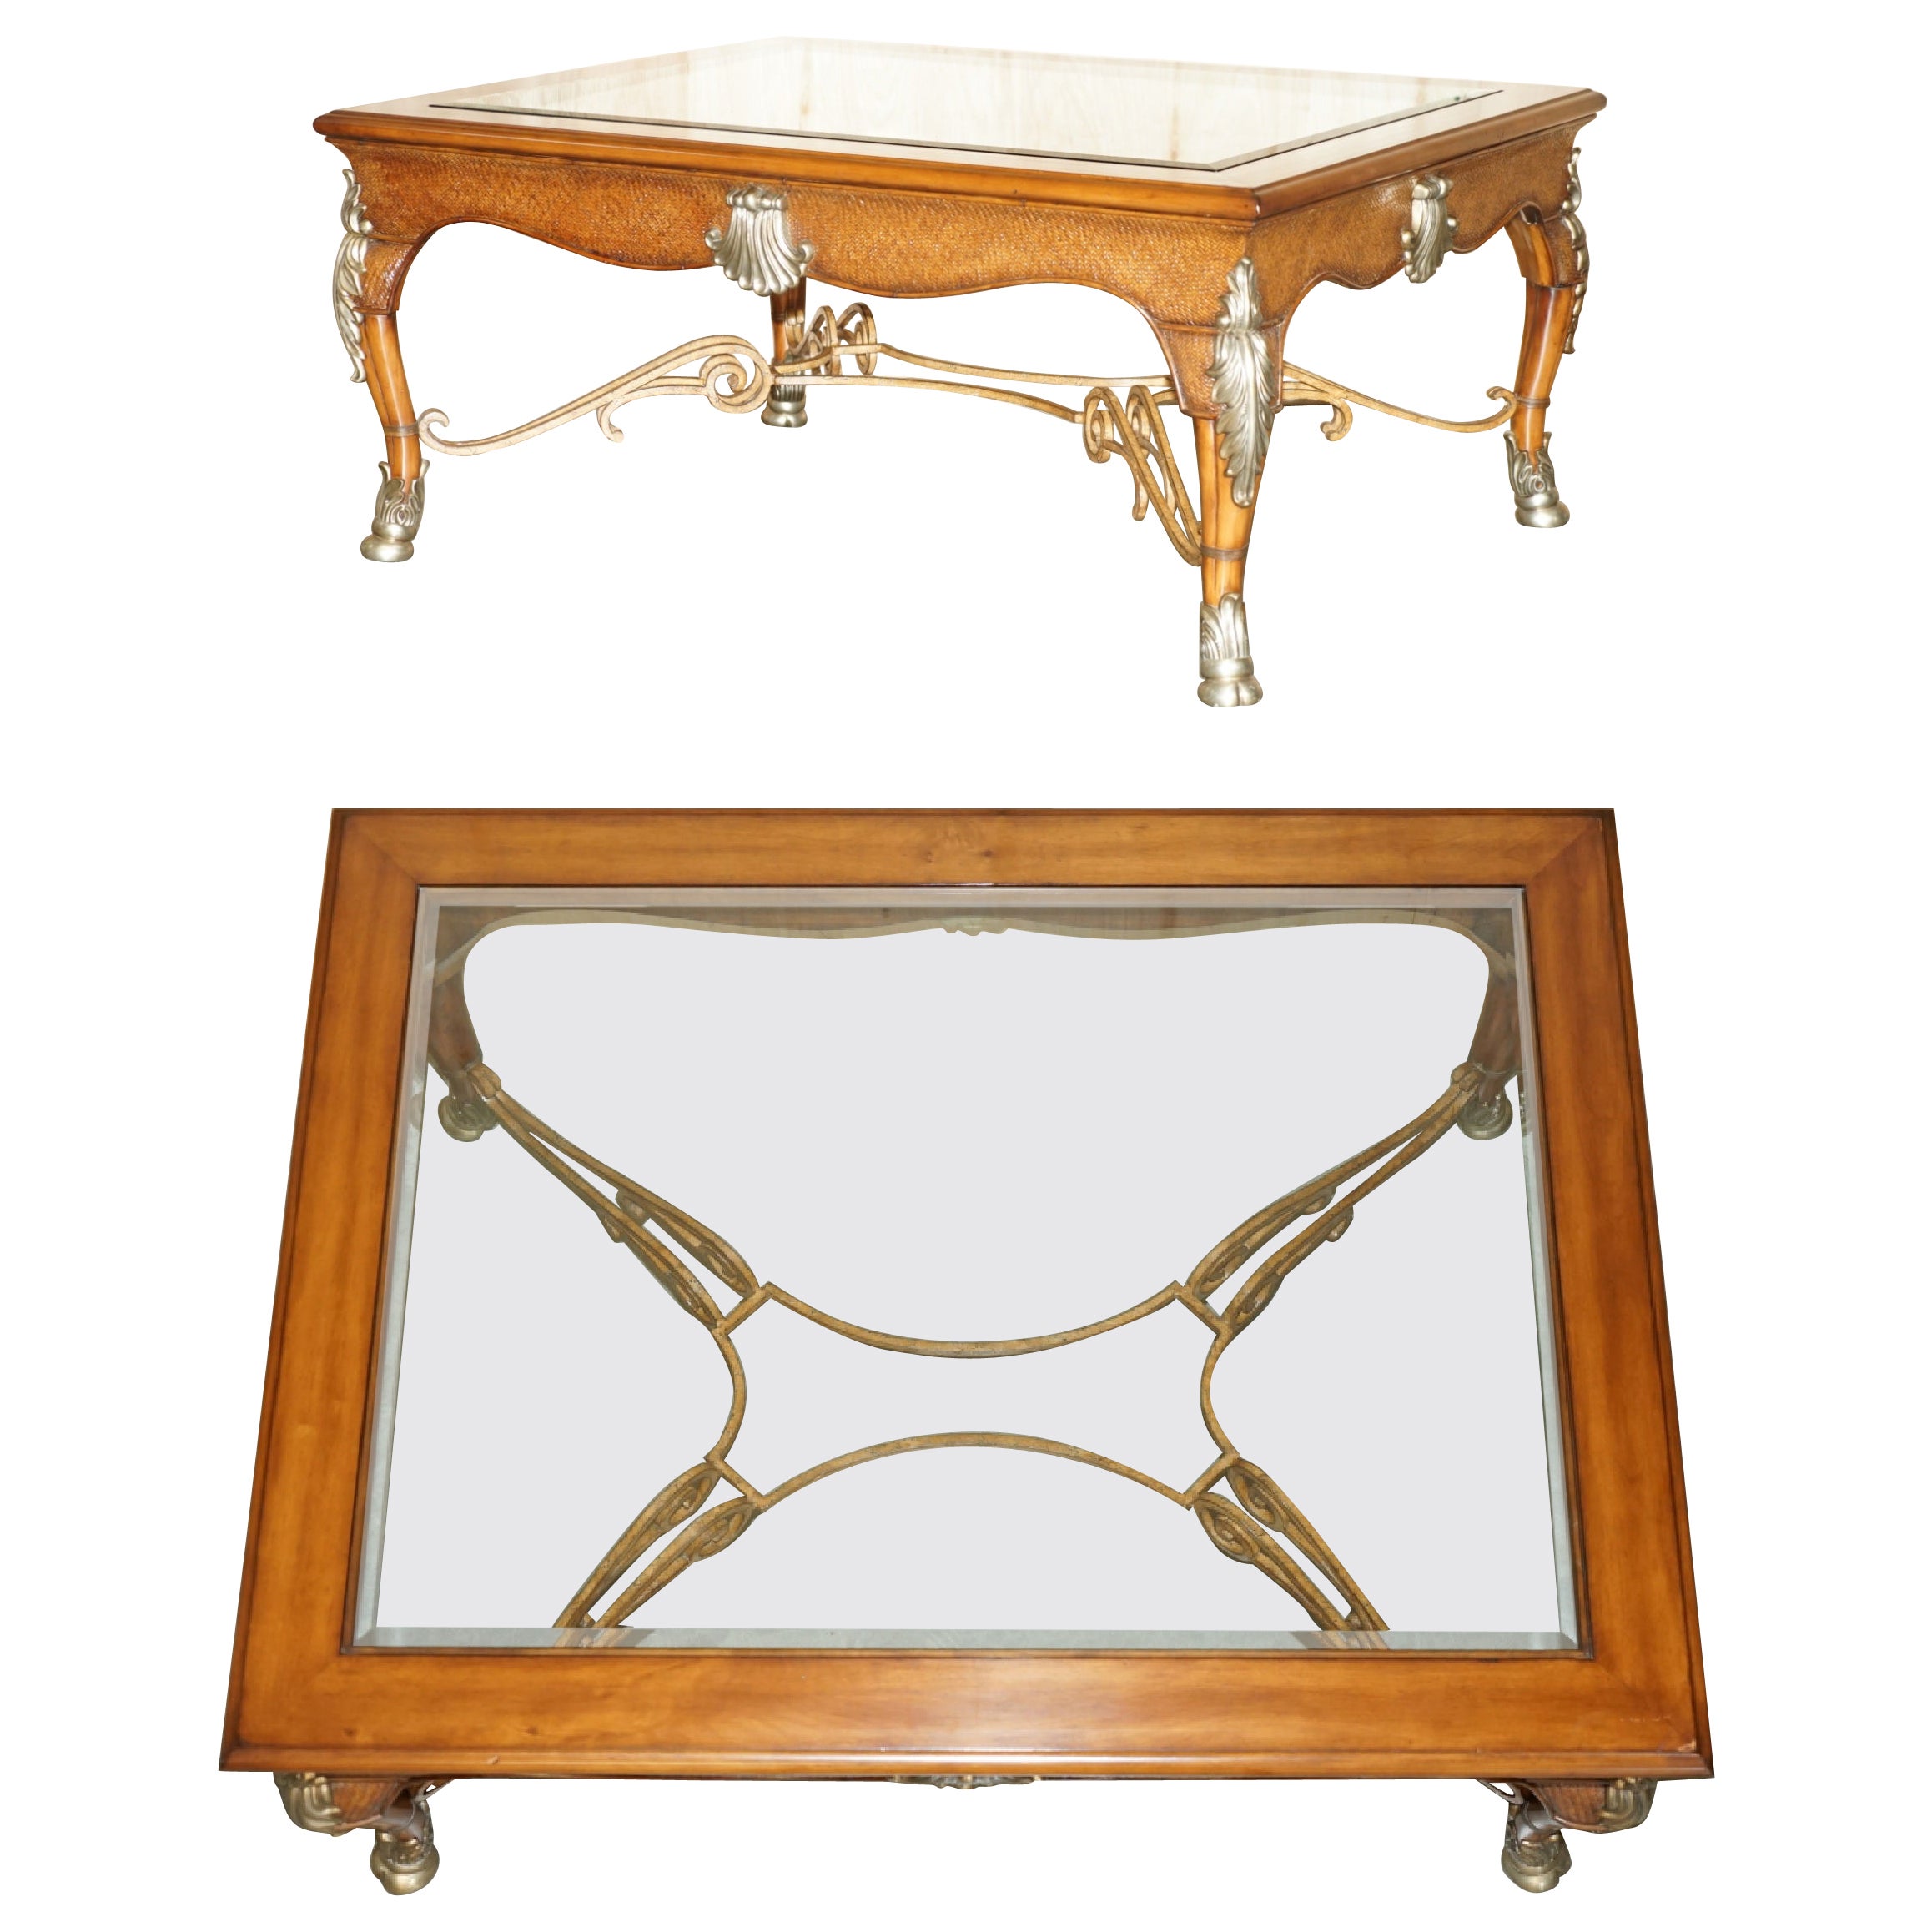 EXQUISITE EXTRA LARGE THOMASVILLE SAFARI COLLECTION OCCASIONAL COFFEE TABLe For Sale